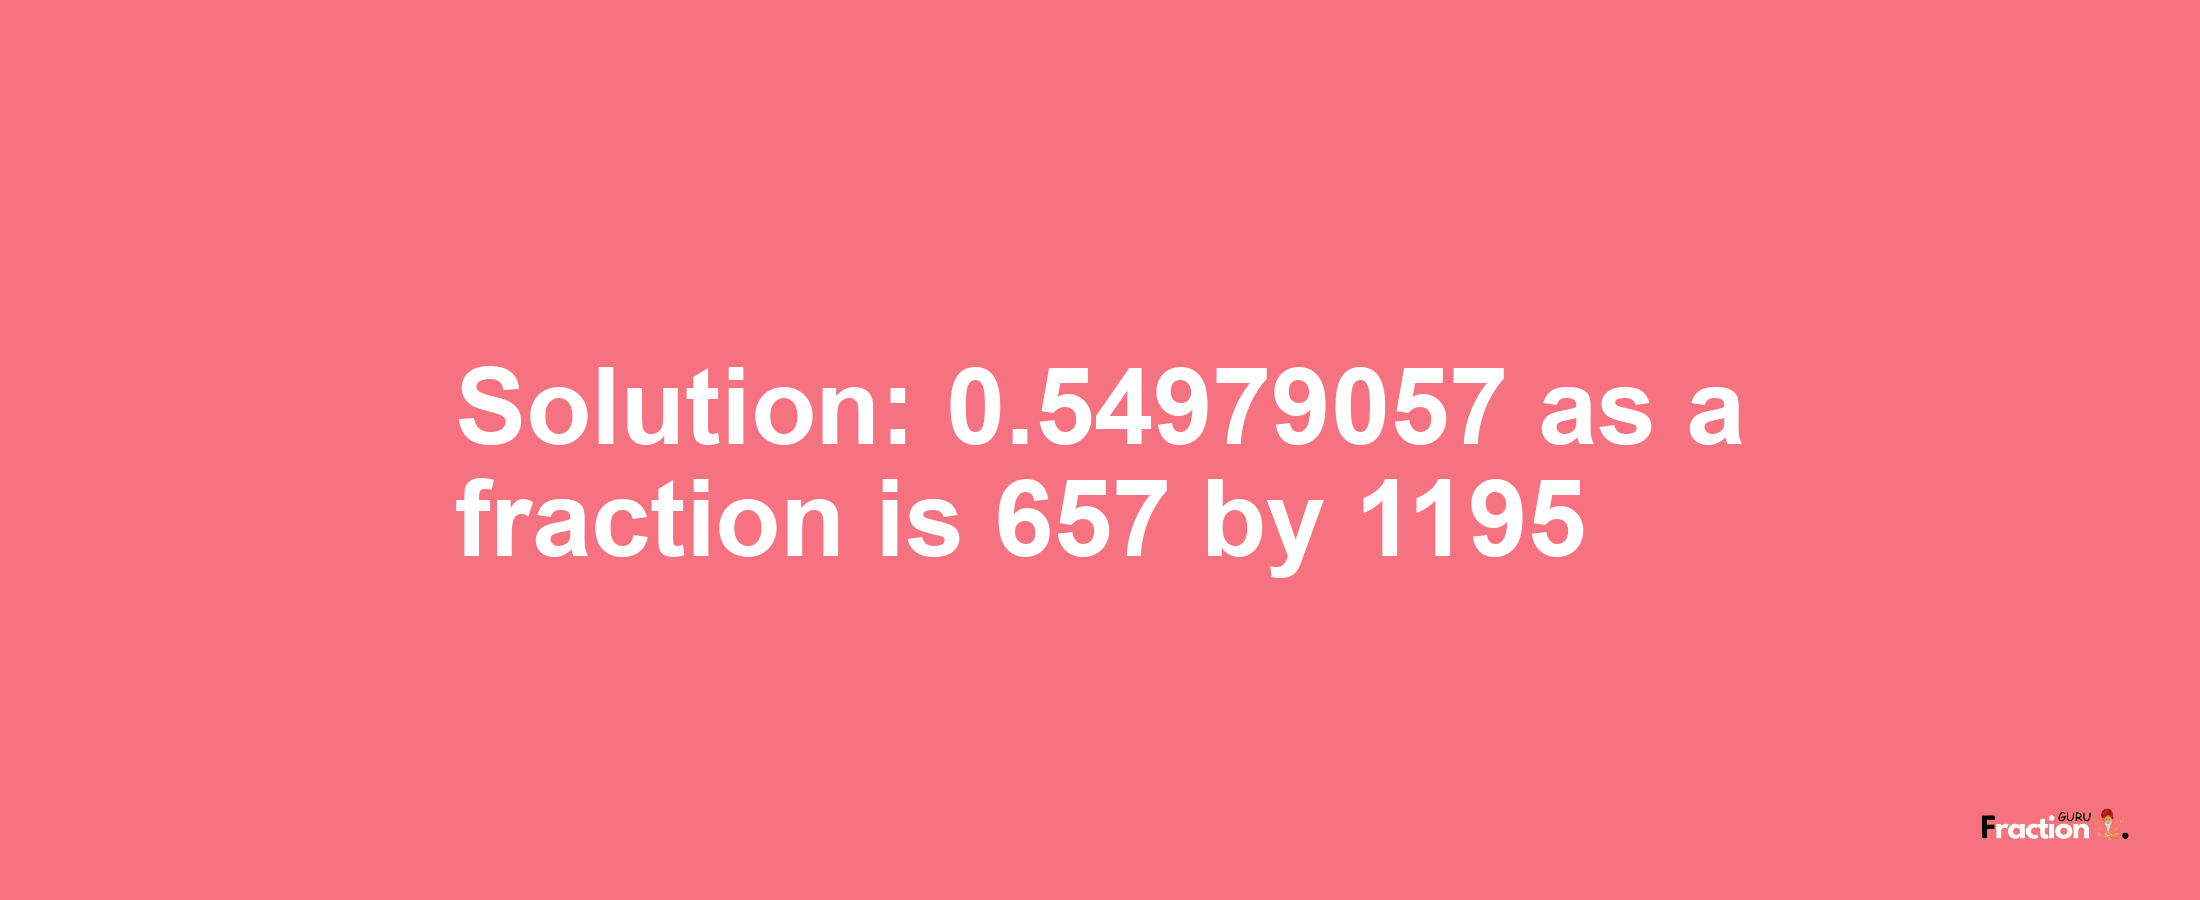 Solution:0.54979057 as a fraction is 657/1195